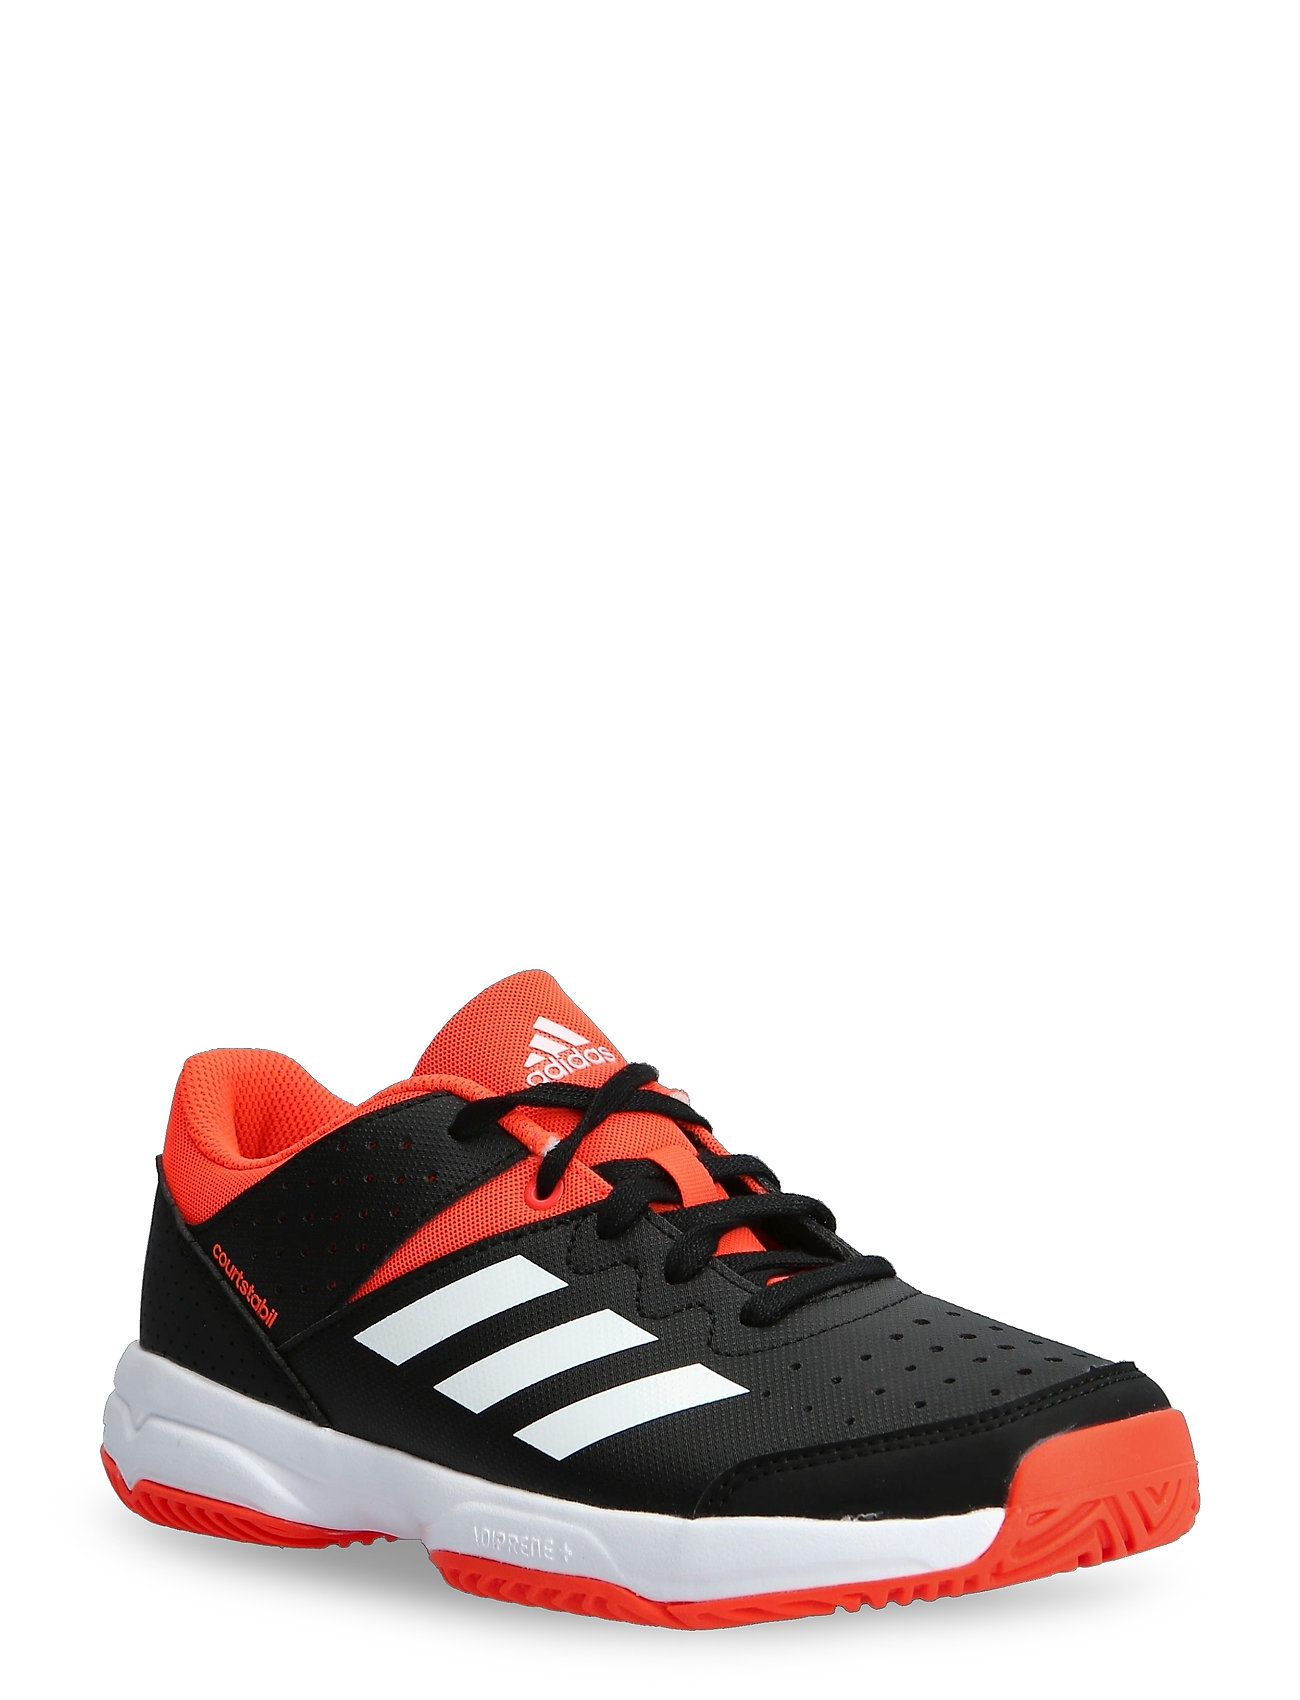 Court Stabil Shoes Sports Shoes Running/training Shoes Musta Adidas Performance, adidas Performance